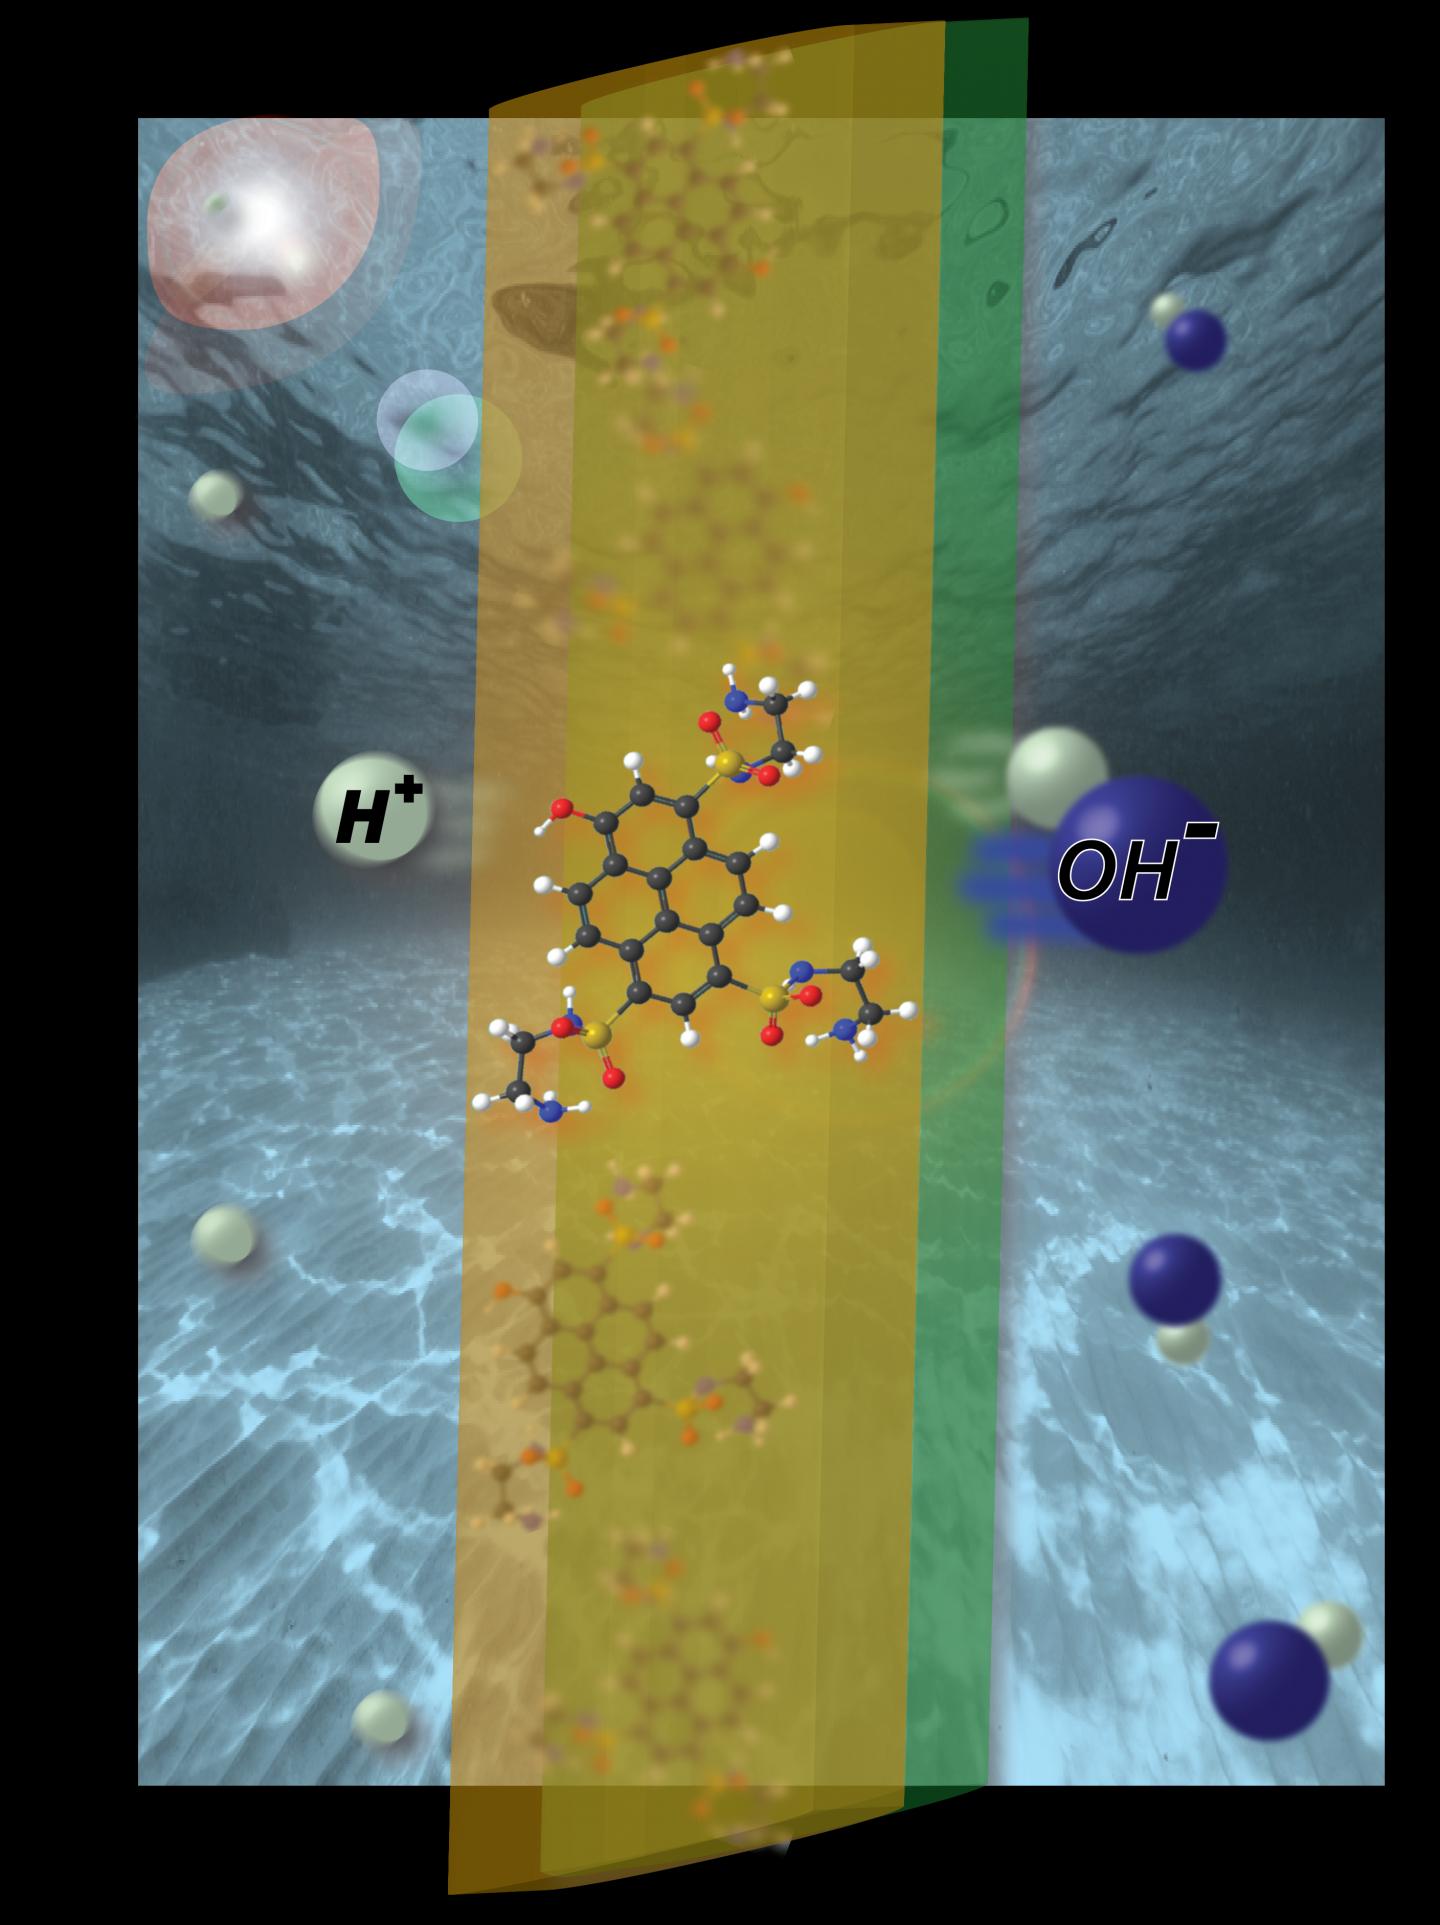 Ionic 'Solar Cell' Could Provide On-Demand Water Desalination